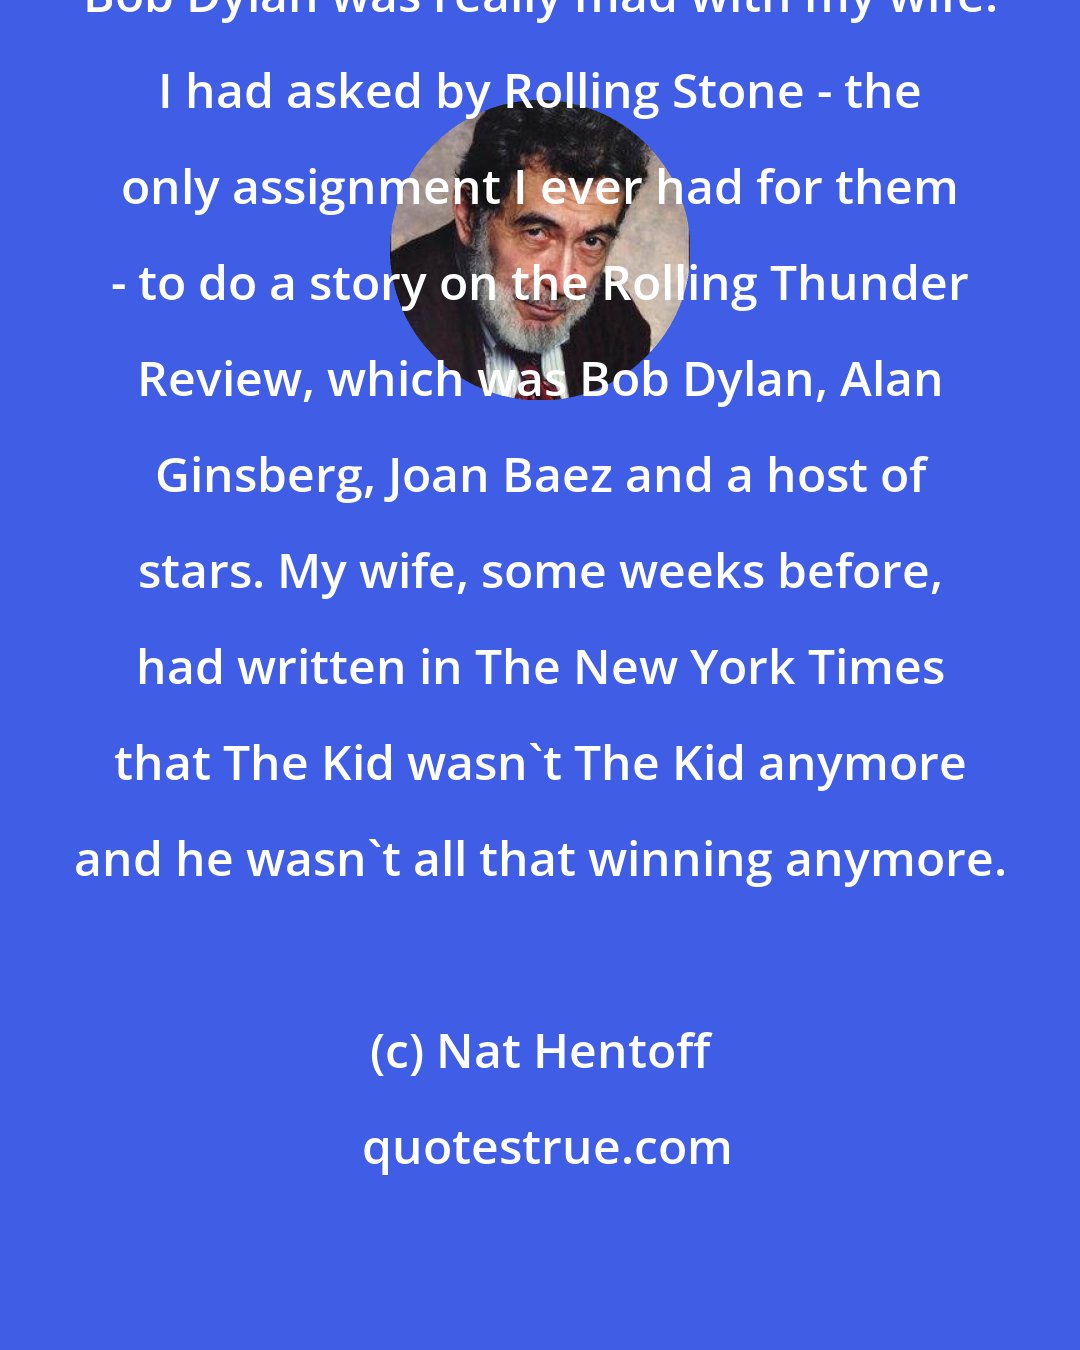 Nat Hentoff: Bob Dylan was really mad with my wife. I had asked by Rolling Stone - the only assignment I ever had for them - to do a story on the Rolling Thunder Review, which was Bob Dylan, Alan Ginsberg, Joan Baez and a host of stars. My wife, some weeks before, had written in The New York Times that The Kid wasn't The Kid anymore and he wasn't all that winning anymore.